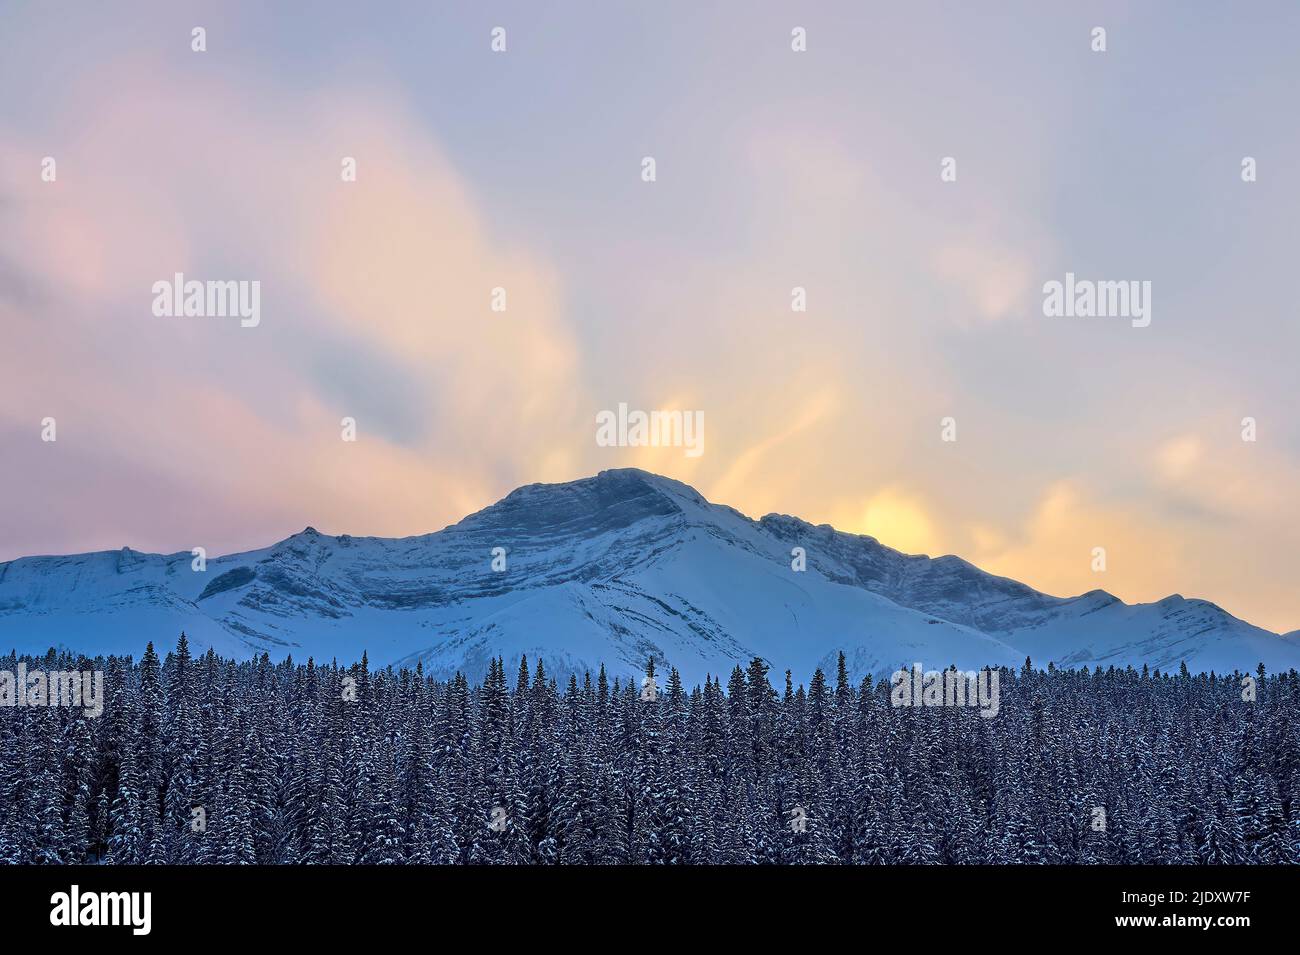 A beautiful winter sky over a snow-capped rocky mountain in western Alberta Canada Stock Photo